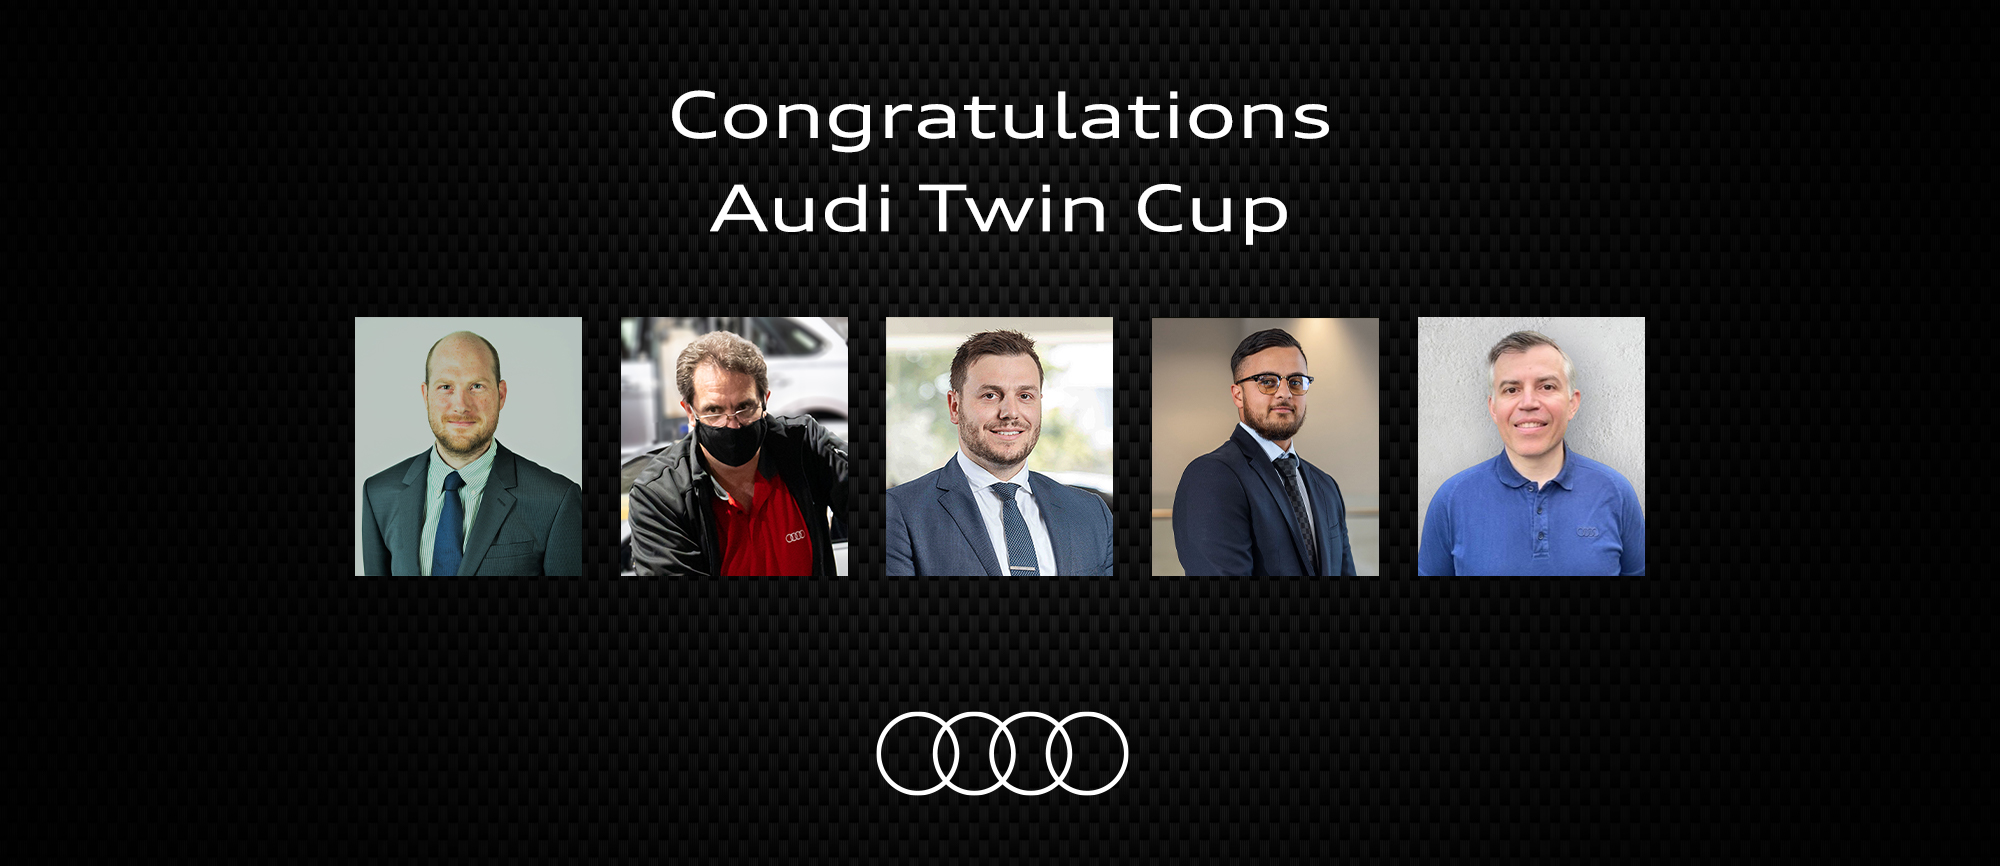 Autosports Audi dealerships lead the winners of Audi Twin Cup